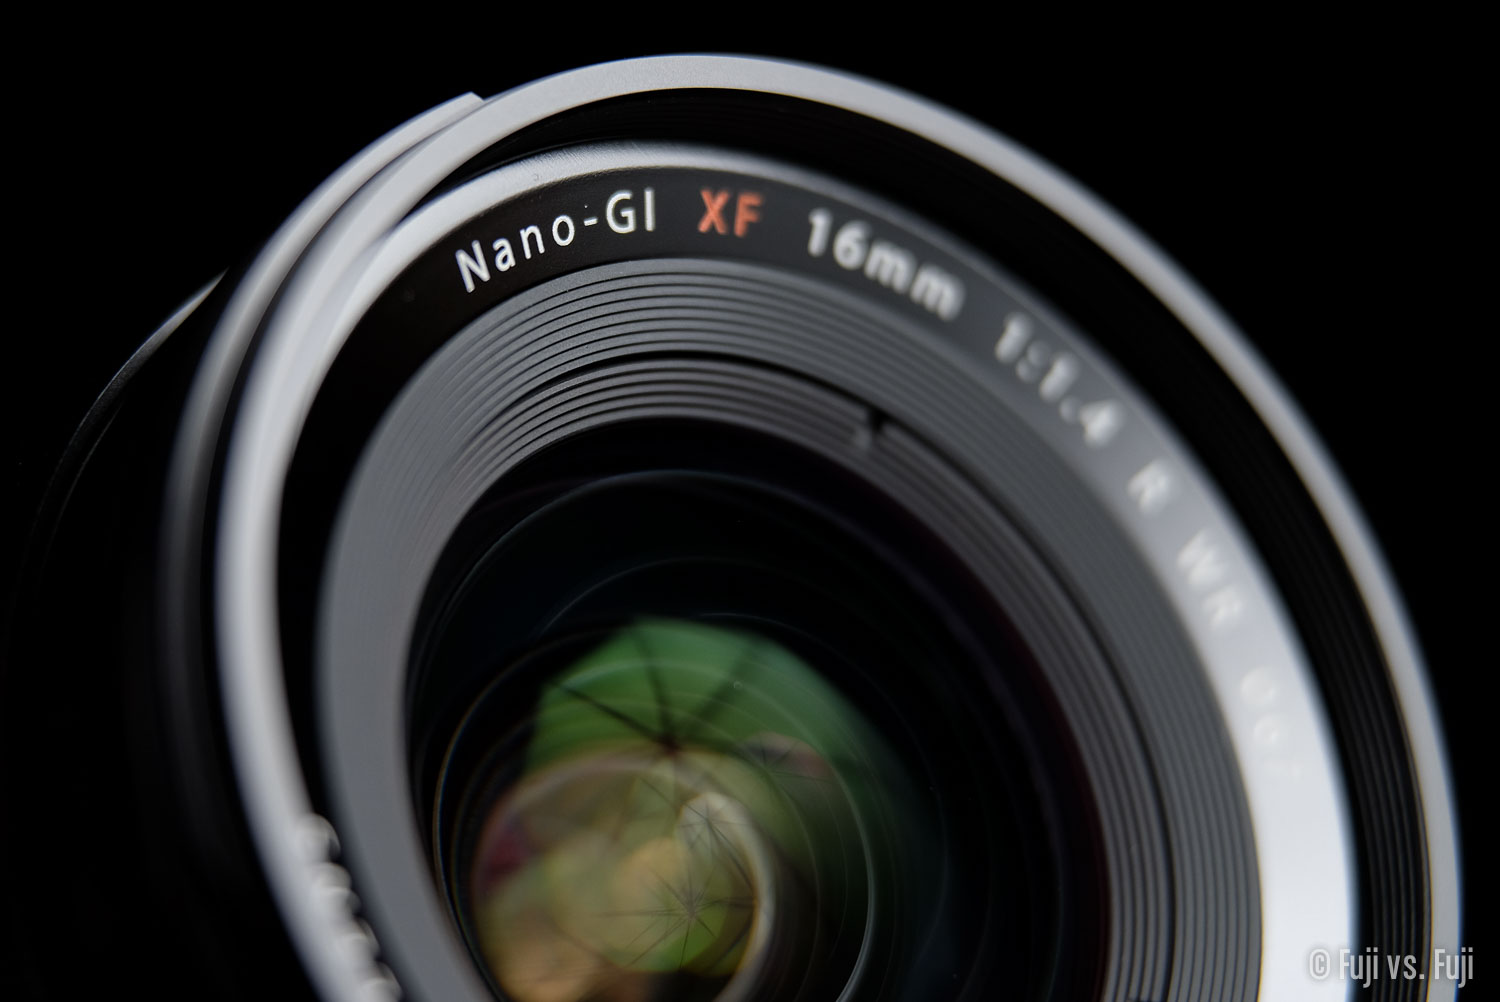 Fuji’s Nano-GI coating. Will it make the XF 16mm f/1.4 flare-free? Read on to find out